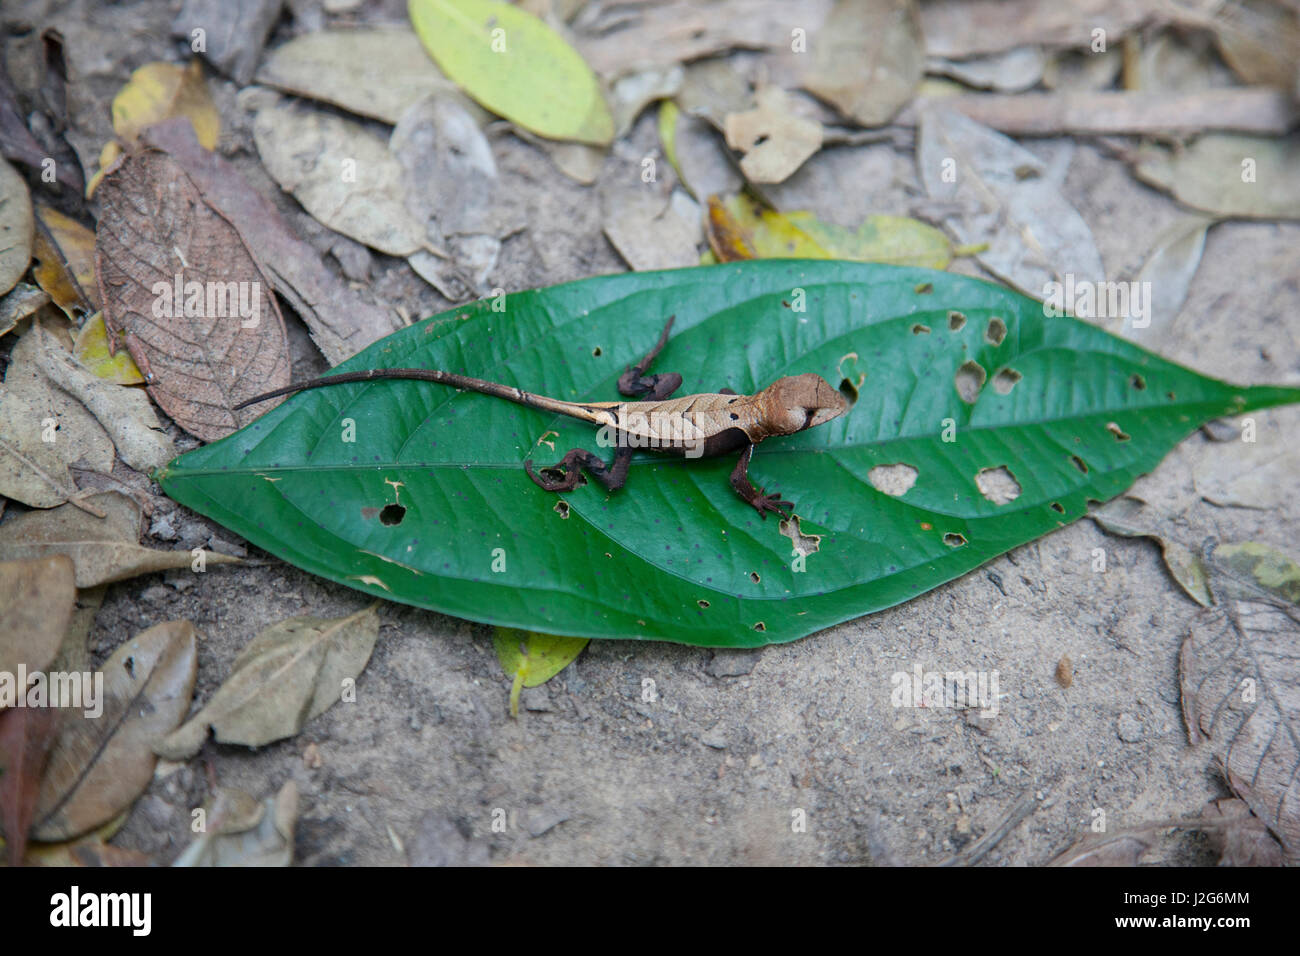 The western leaf lizard is one of the smaller lizards in the Amazon Rainforest. Stock Photo